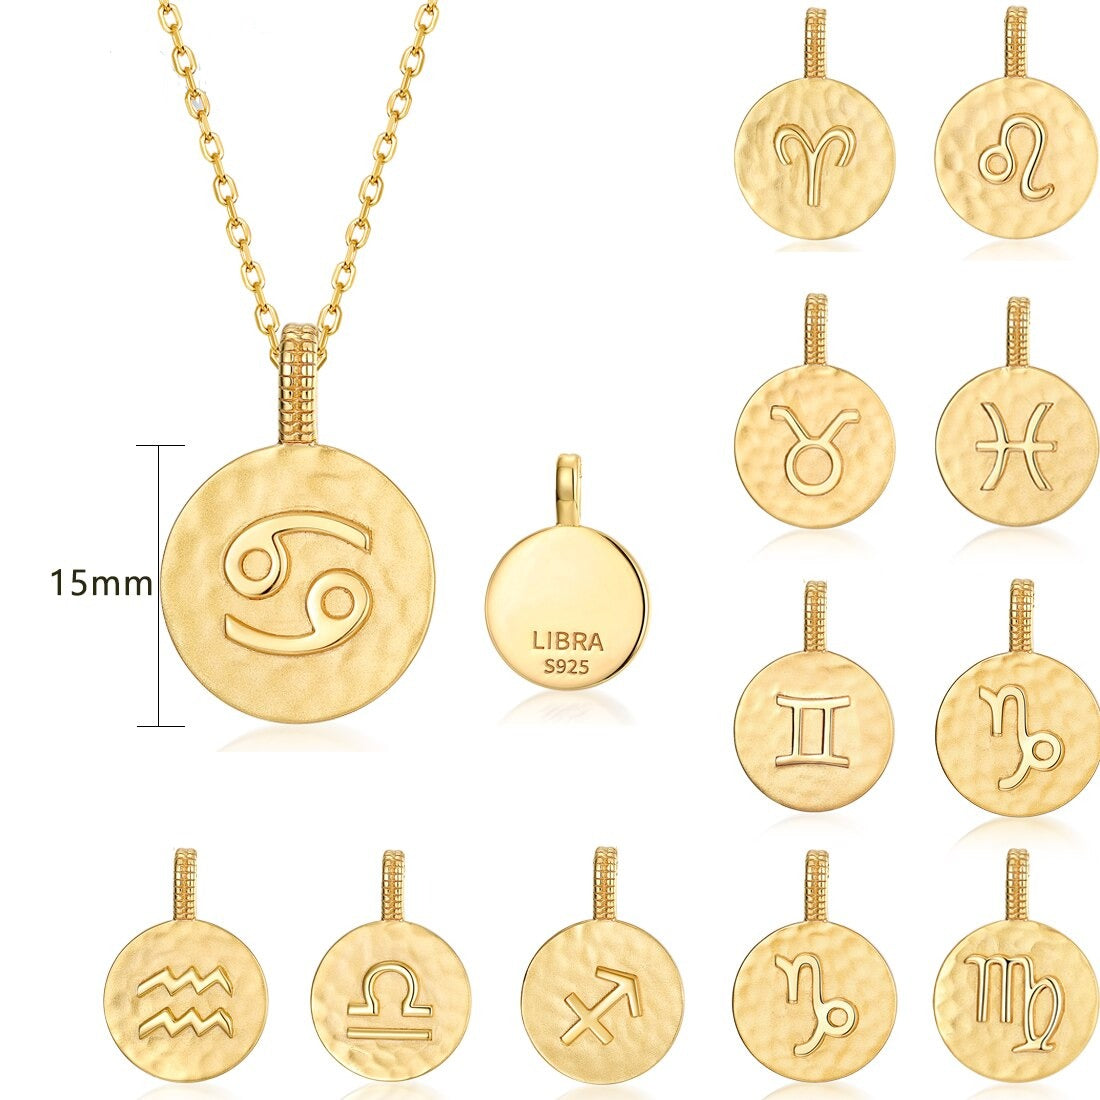 Sagittarius Sign Coin Necklace, Zodiac Sign Necklace, 10K Gold Plated